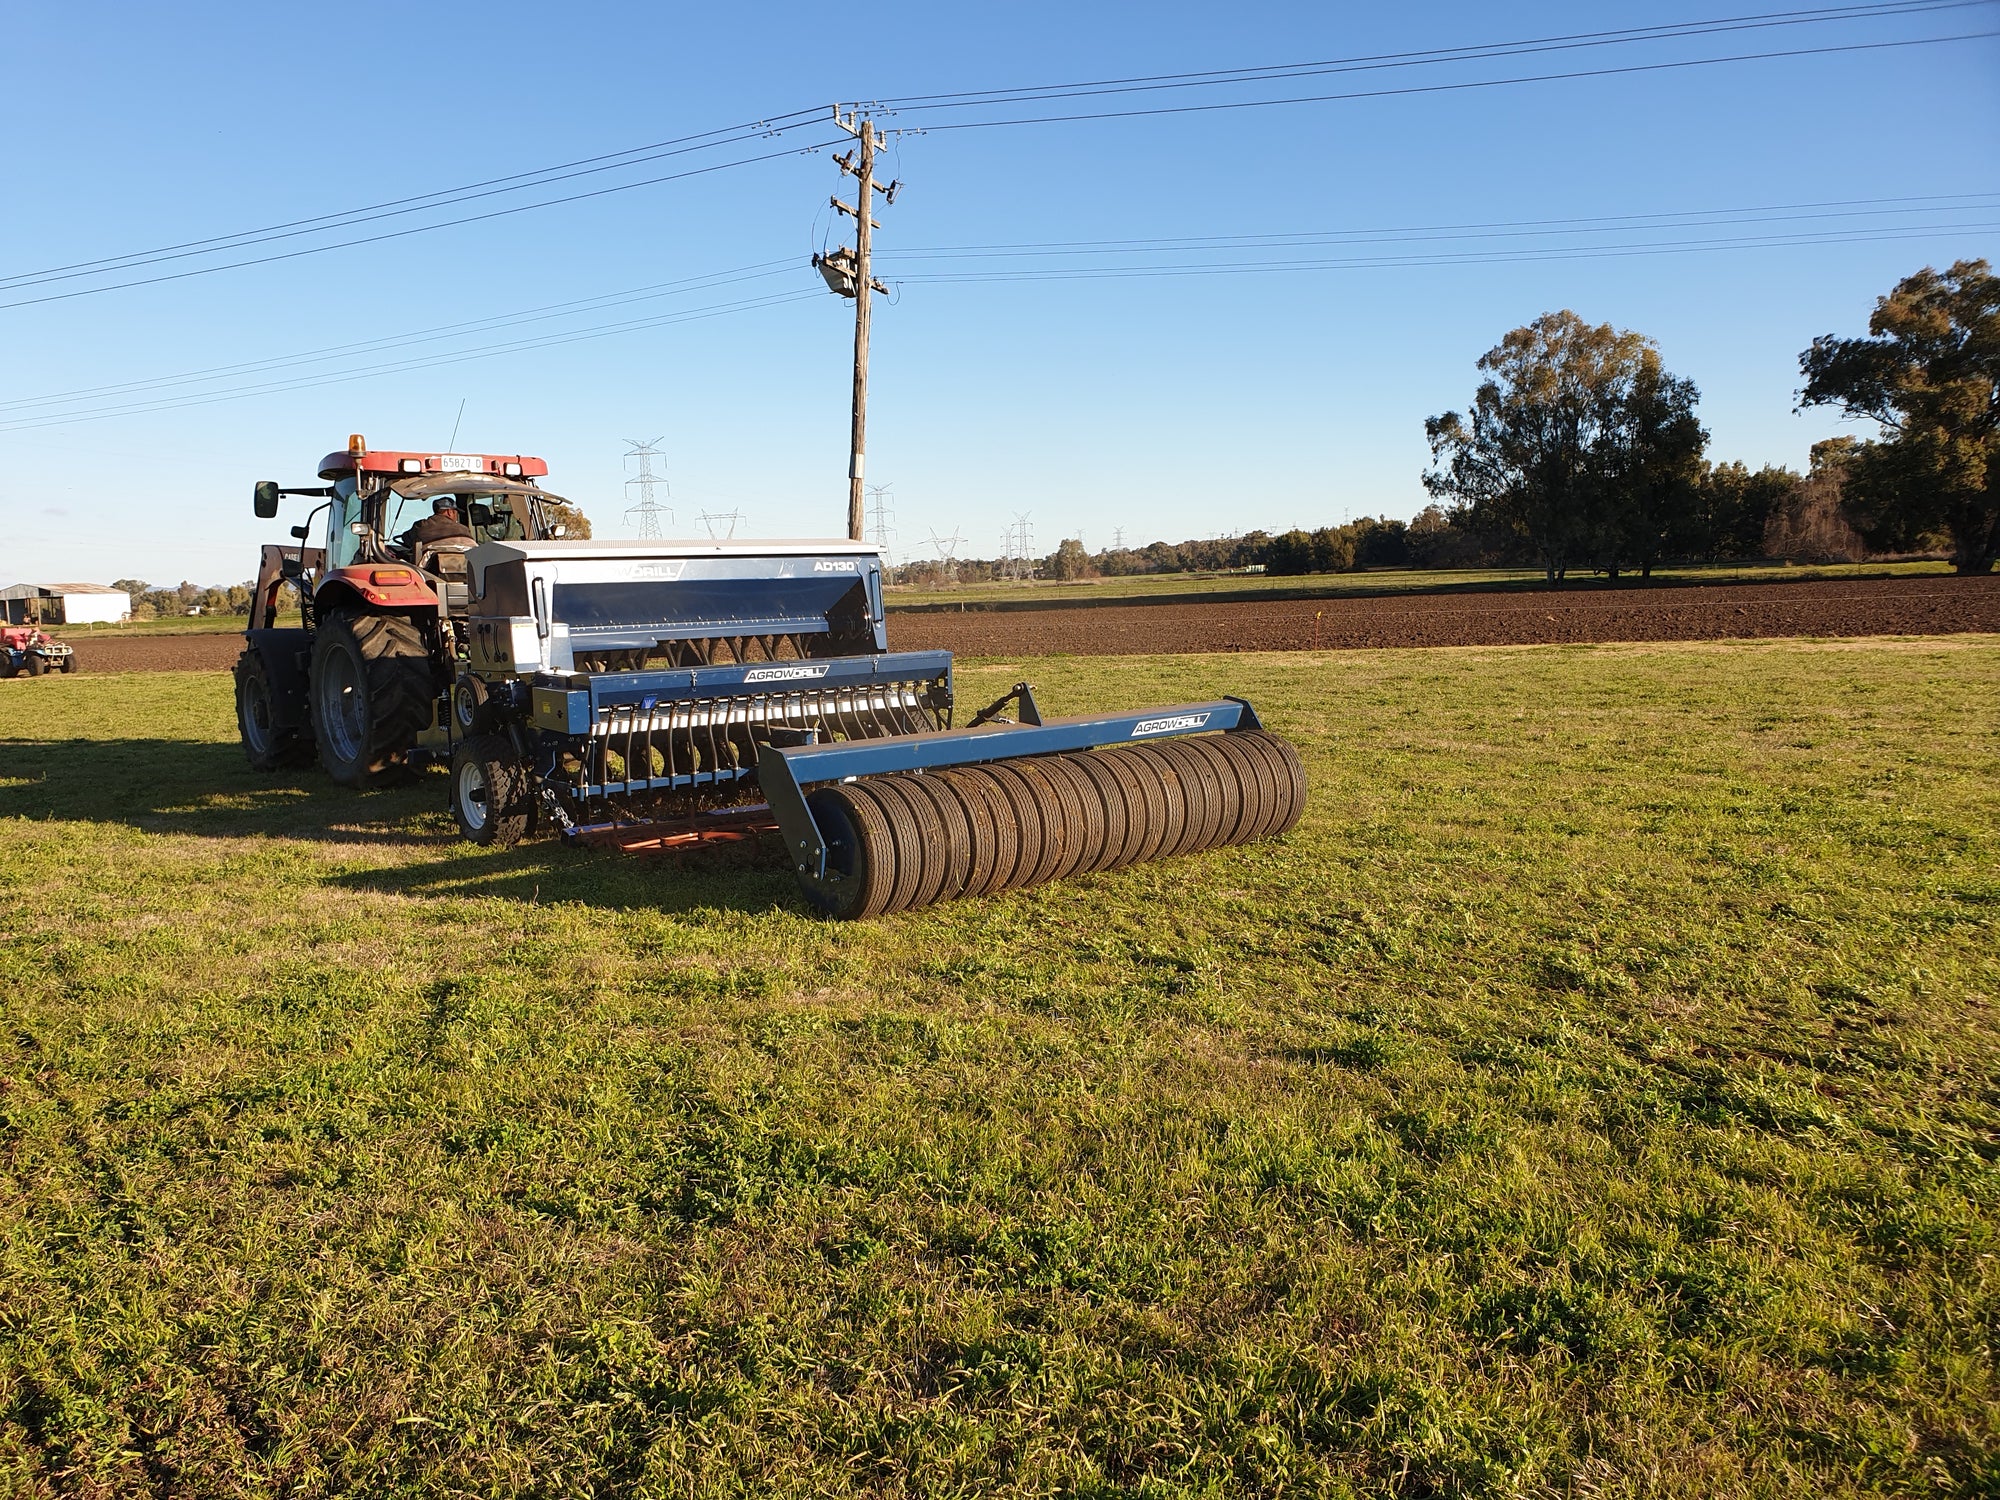 Agrowdrill seed drill trailing a rubber tyre soil roller